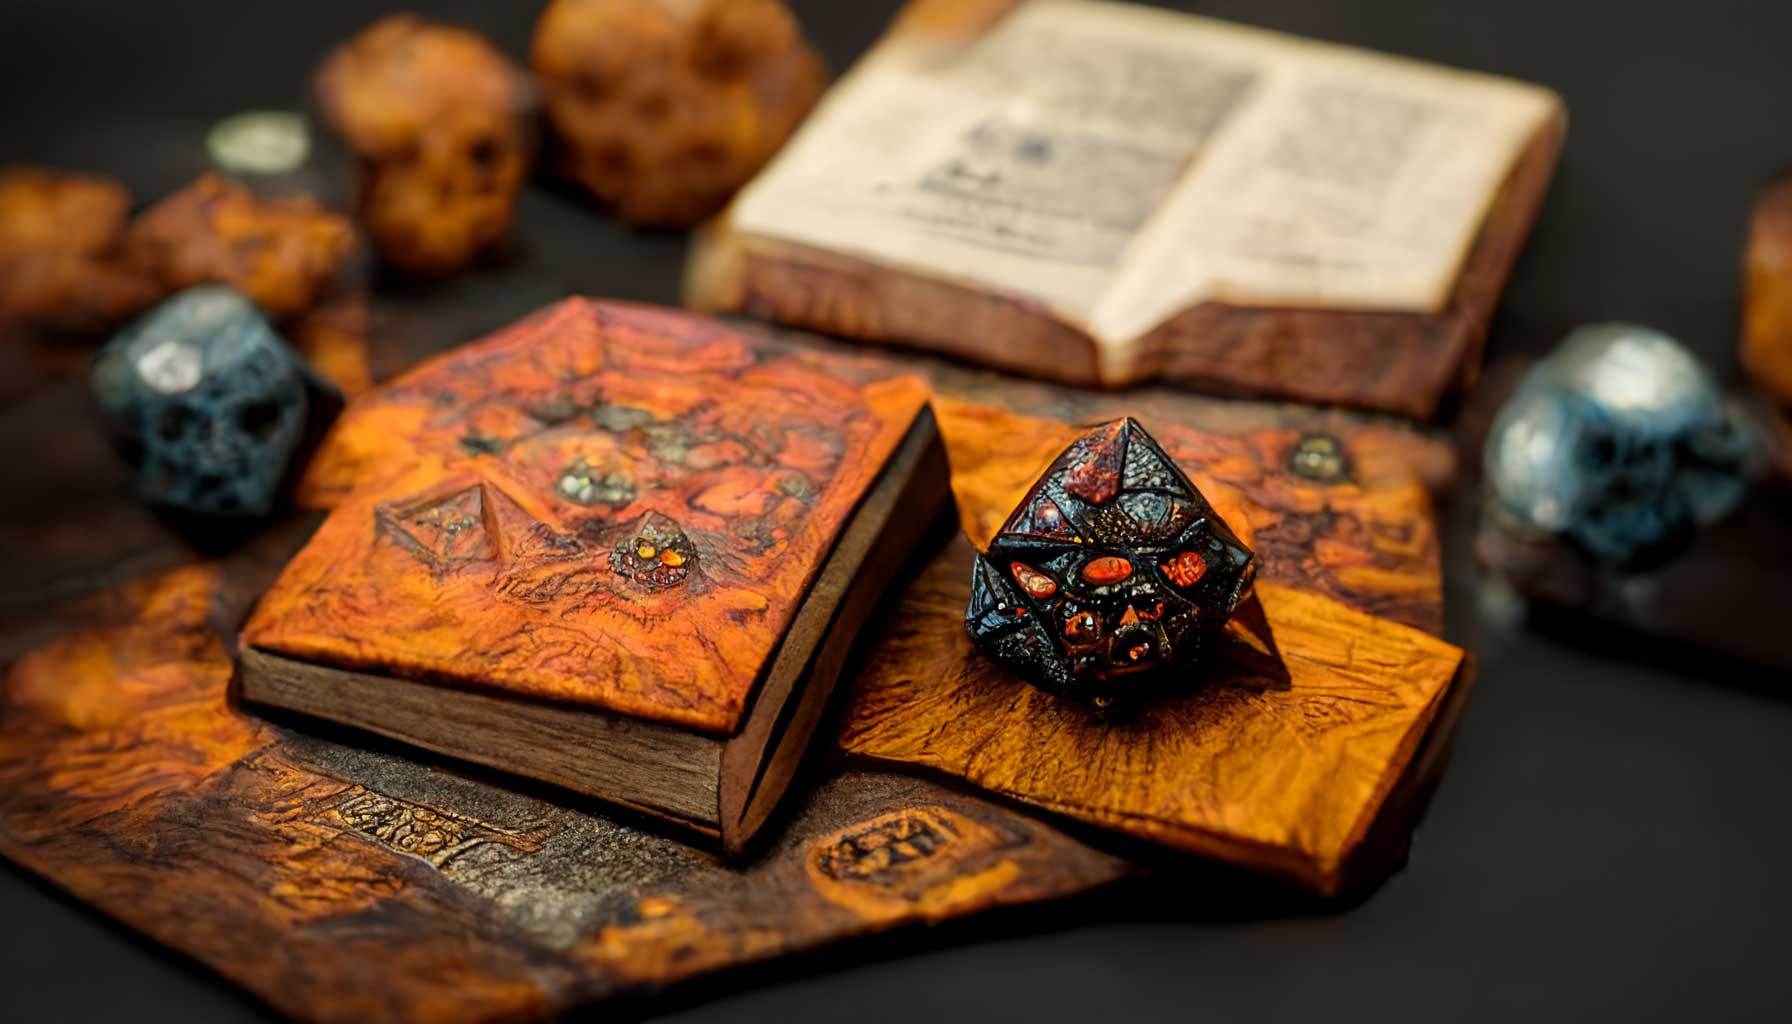 A set of awkward books with leather-seeming covers with raised textures of geometric organic shapes; one on book is multi-facted shiny black fractured pyramid with bright red and blue shapes; in the background are more of those and maybe small skulls; the photo has  shallow field of focus.